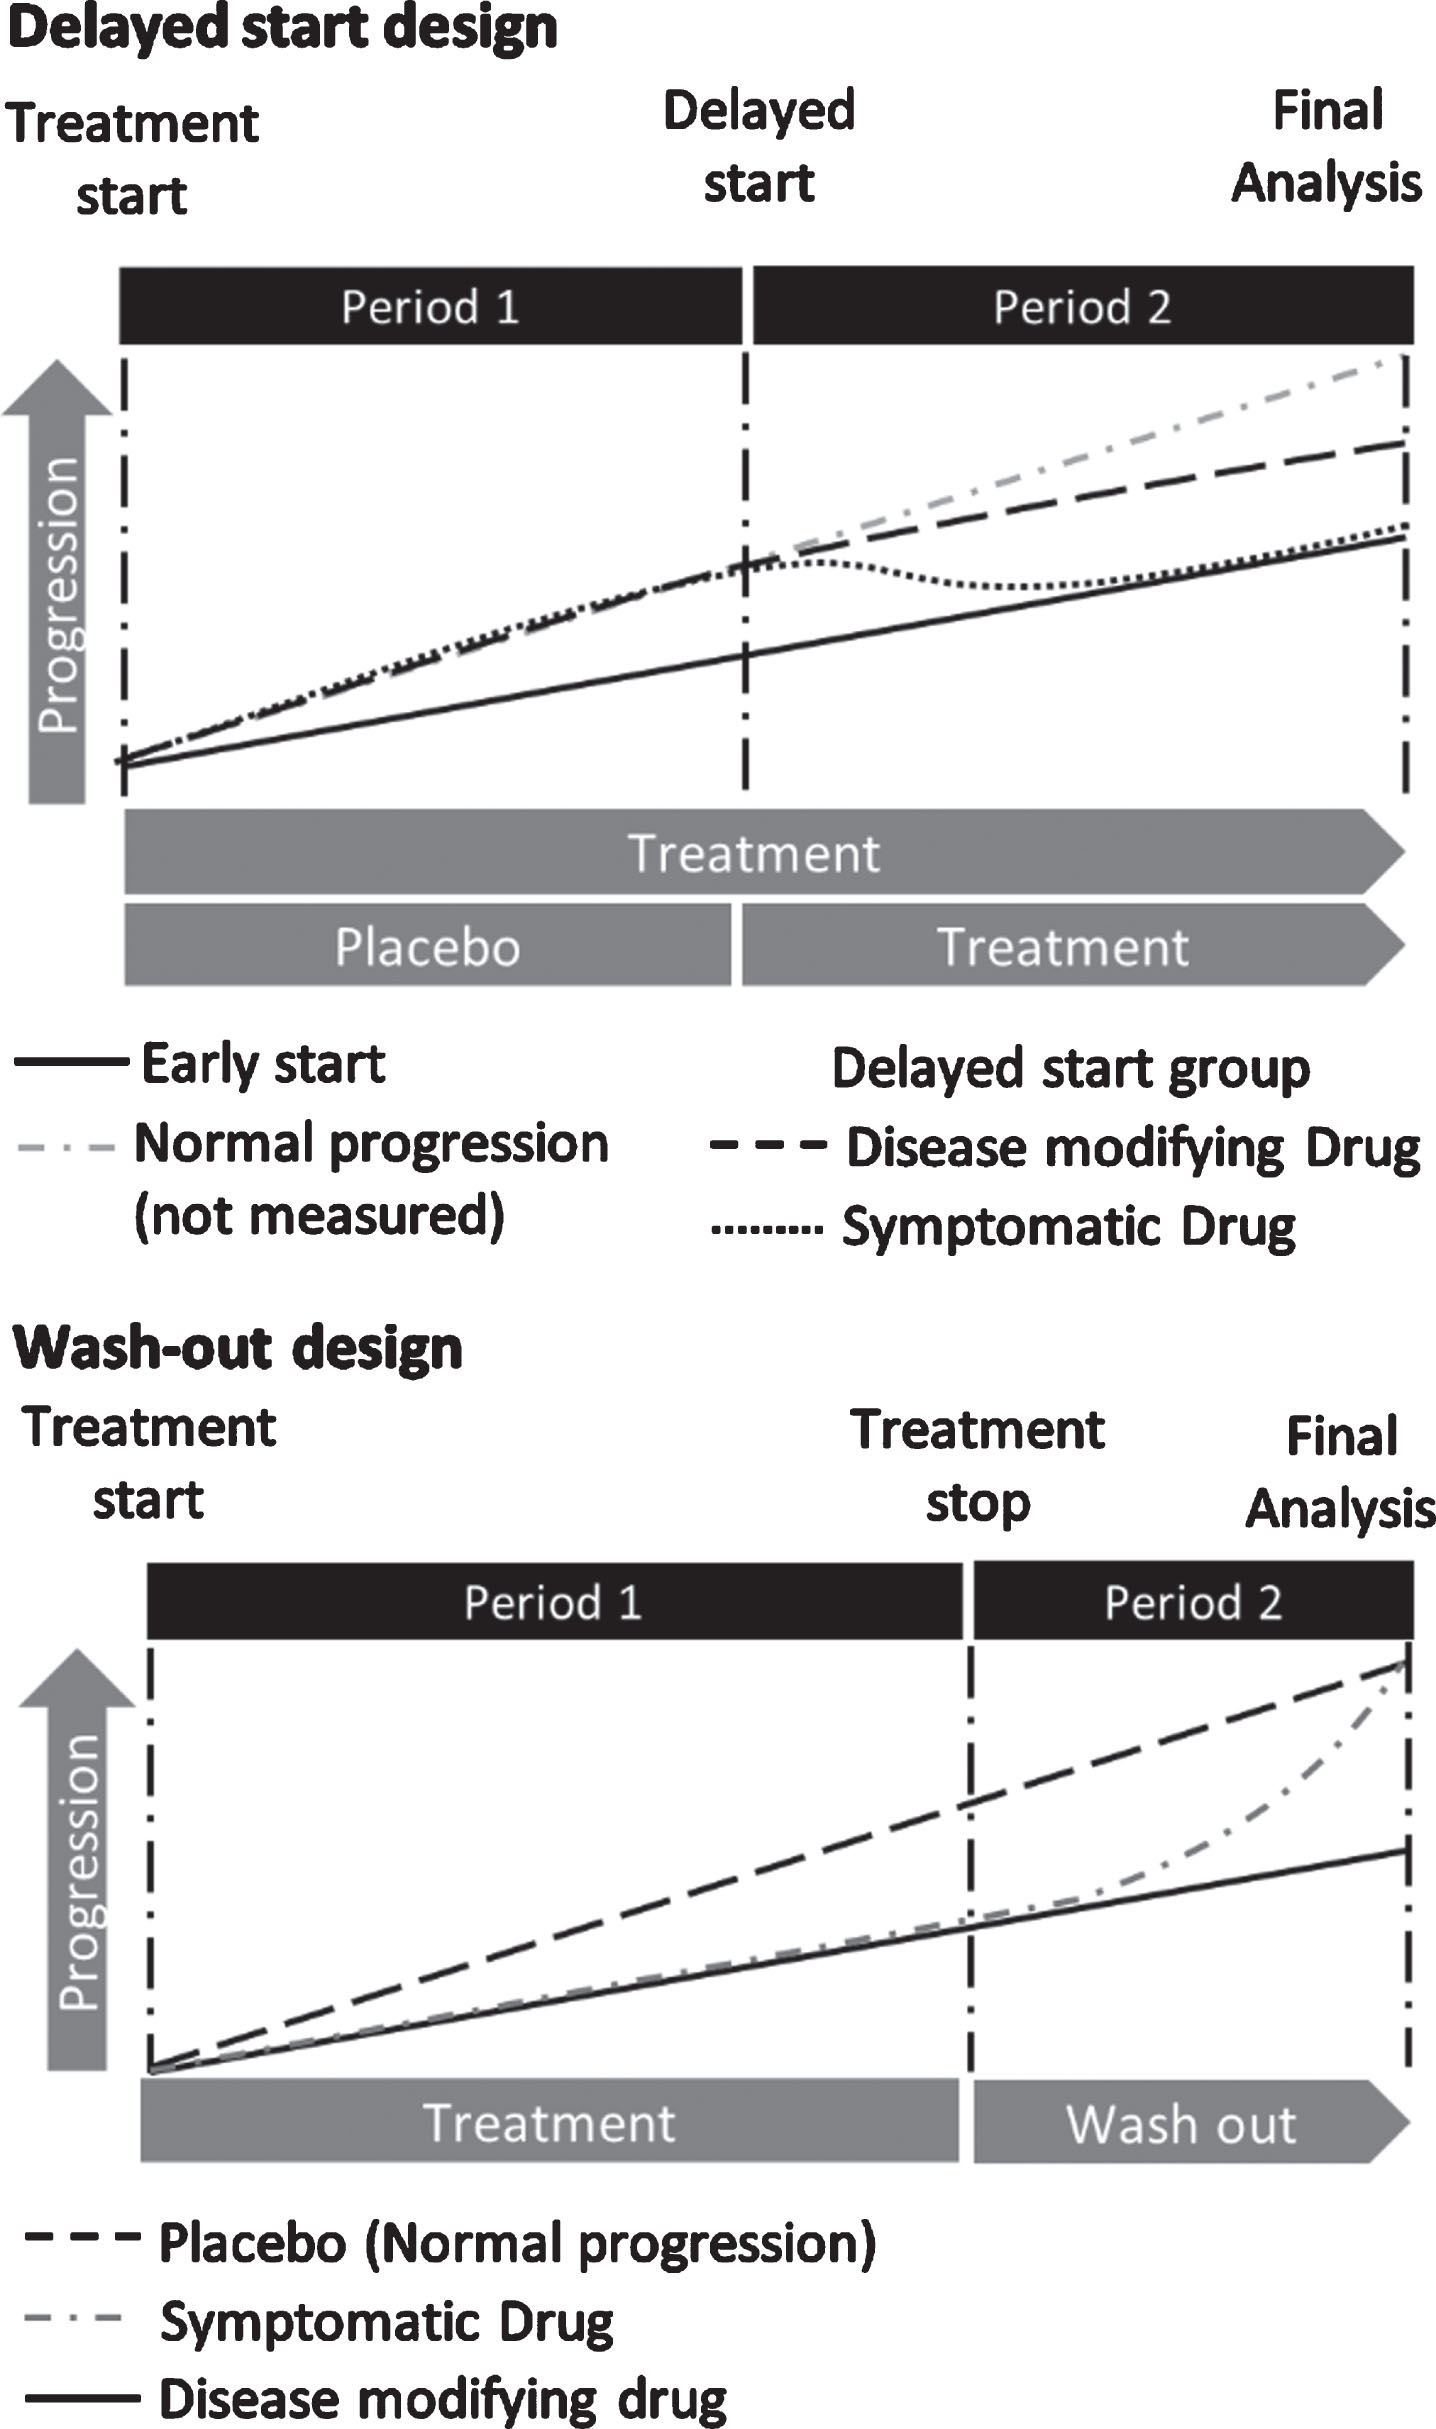 Methodology to investigate disease modification. The delayed start design is a two period trial design. In period one, patients are initially randomised into placebo (delayed start) and treatment arms (early start) at the end of which, the placebo group is switched to the study drug (period two). Both groups will receive the study drug for the remaining duration of the trial. Should a treatment be neuroprotective rather than symptomatic, the early start group should have a reduced progression rate as compared to placebo in period one, a significantly improved MDS-UPDRS score from baseline at the end of period two and an equal or reduced rate of disease progression in the early start group compared to the delayed start group in period two. Thus, such a design has three endpoints [31]. The wash out design is a two period design that evaluates a global change in the outcome measure of choice from baseline over a drug administration period and the maintenance of this change after the study drug is withdrawn (washed out).